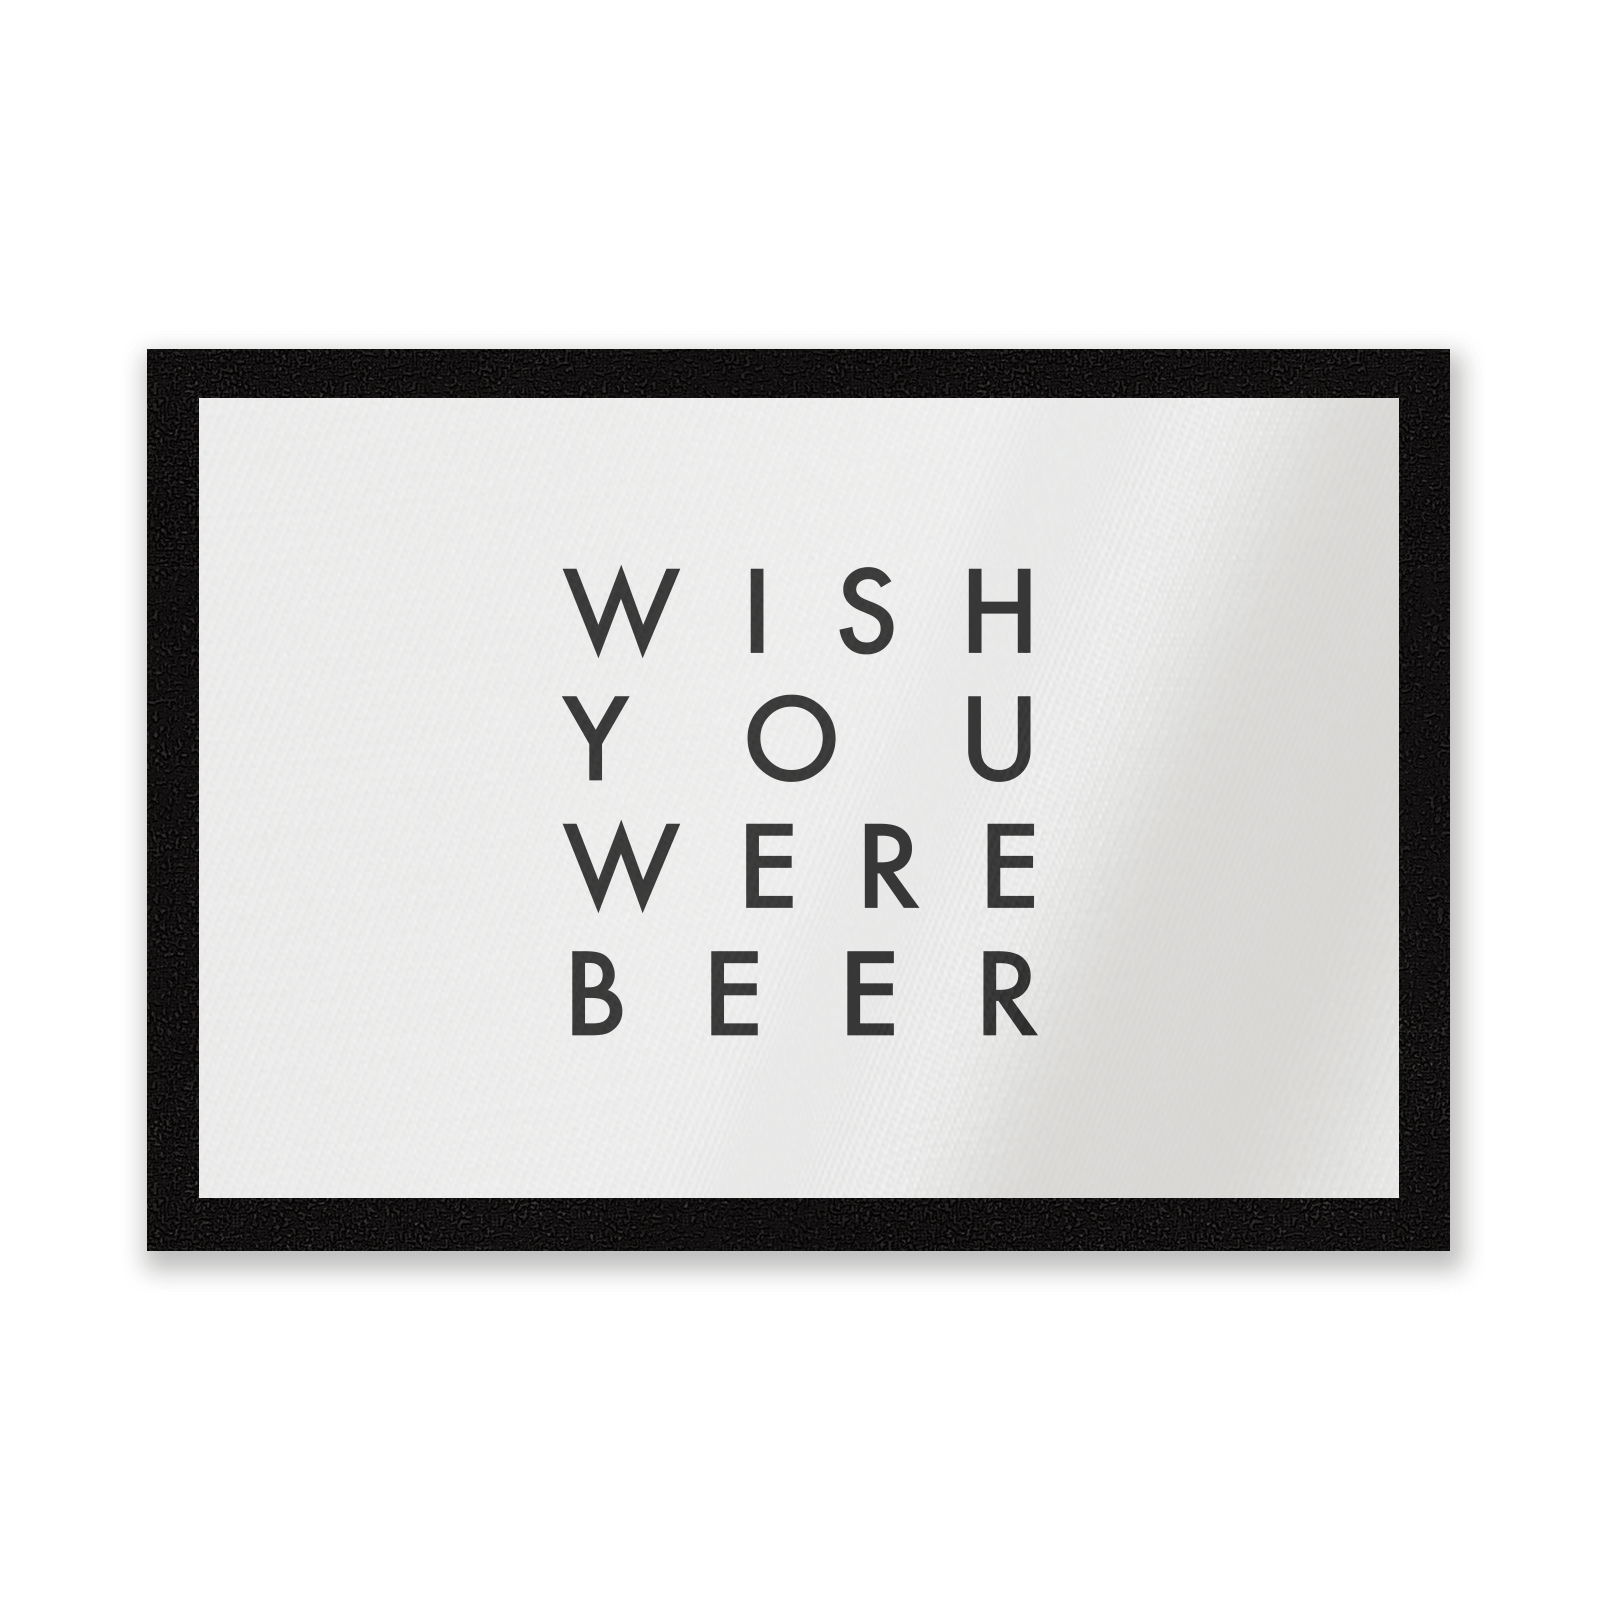 Wish You Were Beer Entrance Mat